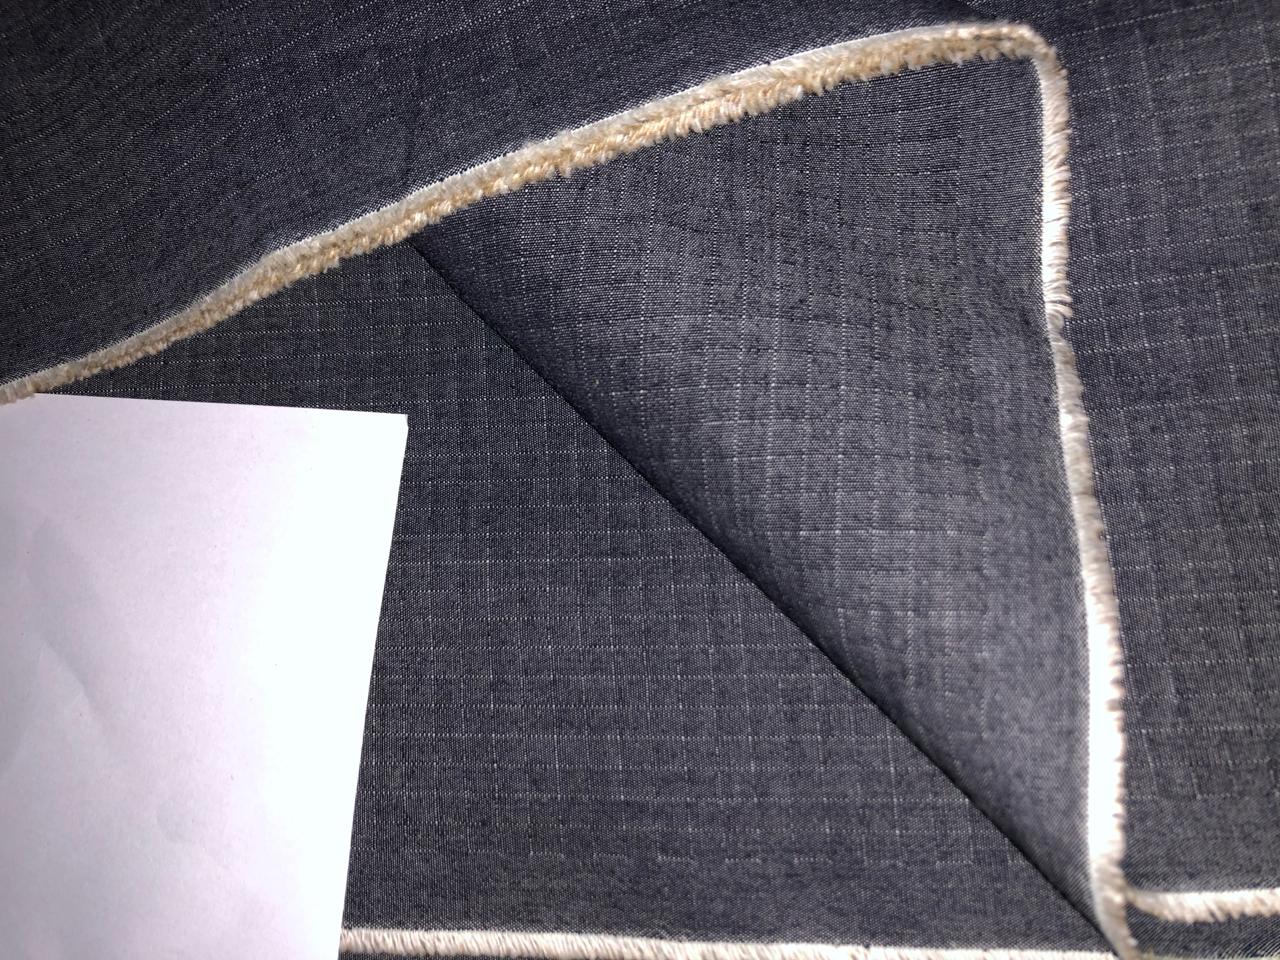 100% Cotton Denim Fabric 58" wide available in 2 STYLES DENIM PLAIDS WITH SCOOTER MOTIF AND  DENIM SELF PLAIDS CHARCOAL GREY